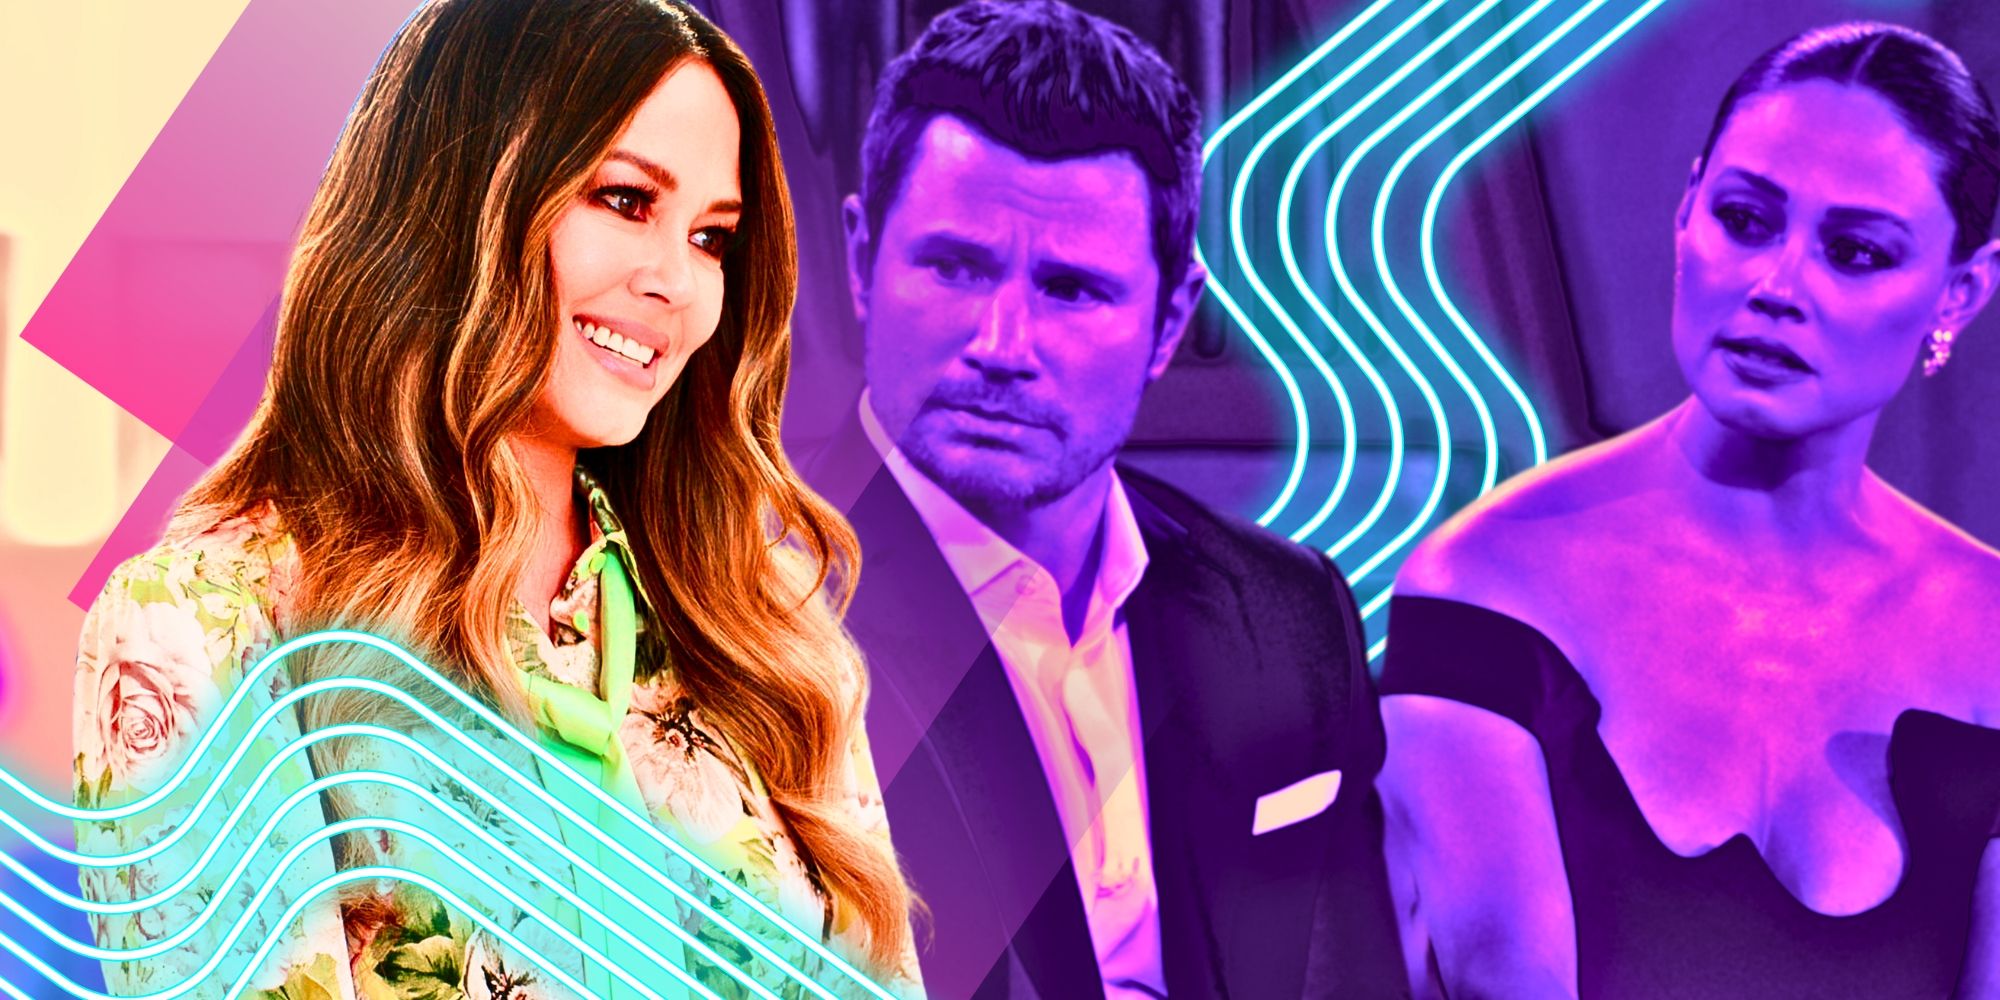 Montage of Love Is Blind's Nick and Vanessa Lachey smiling and looking serious